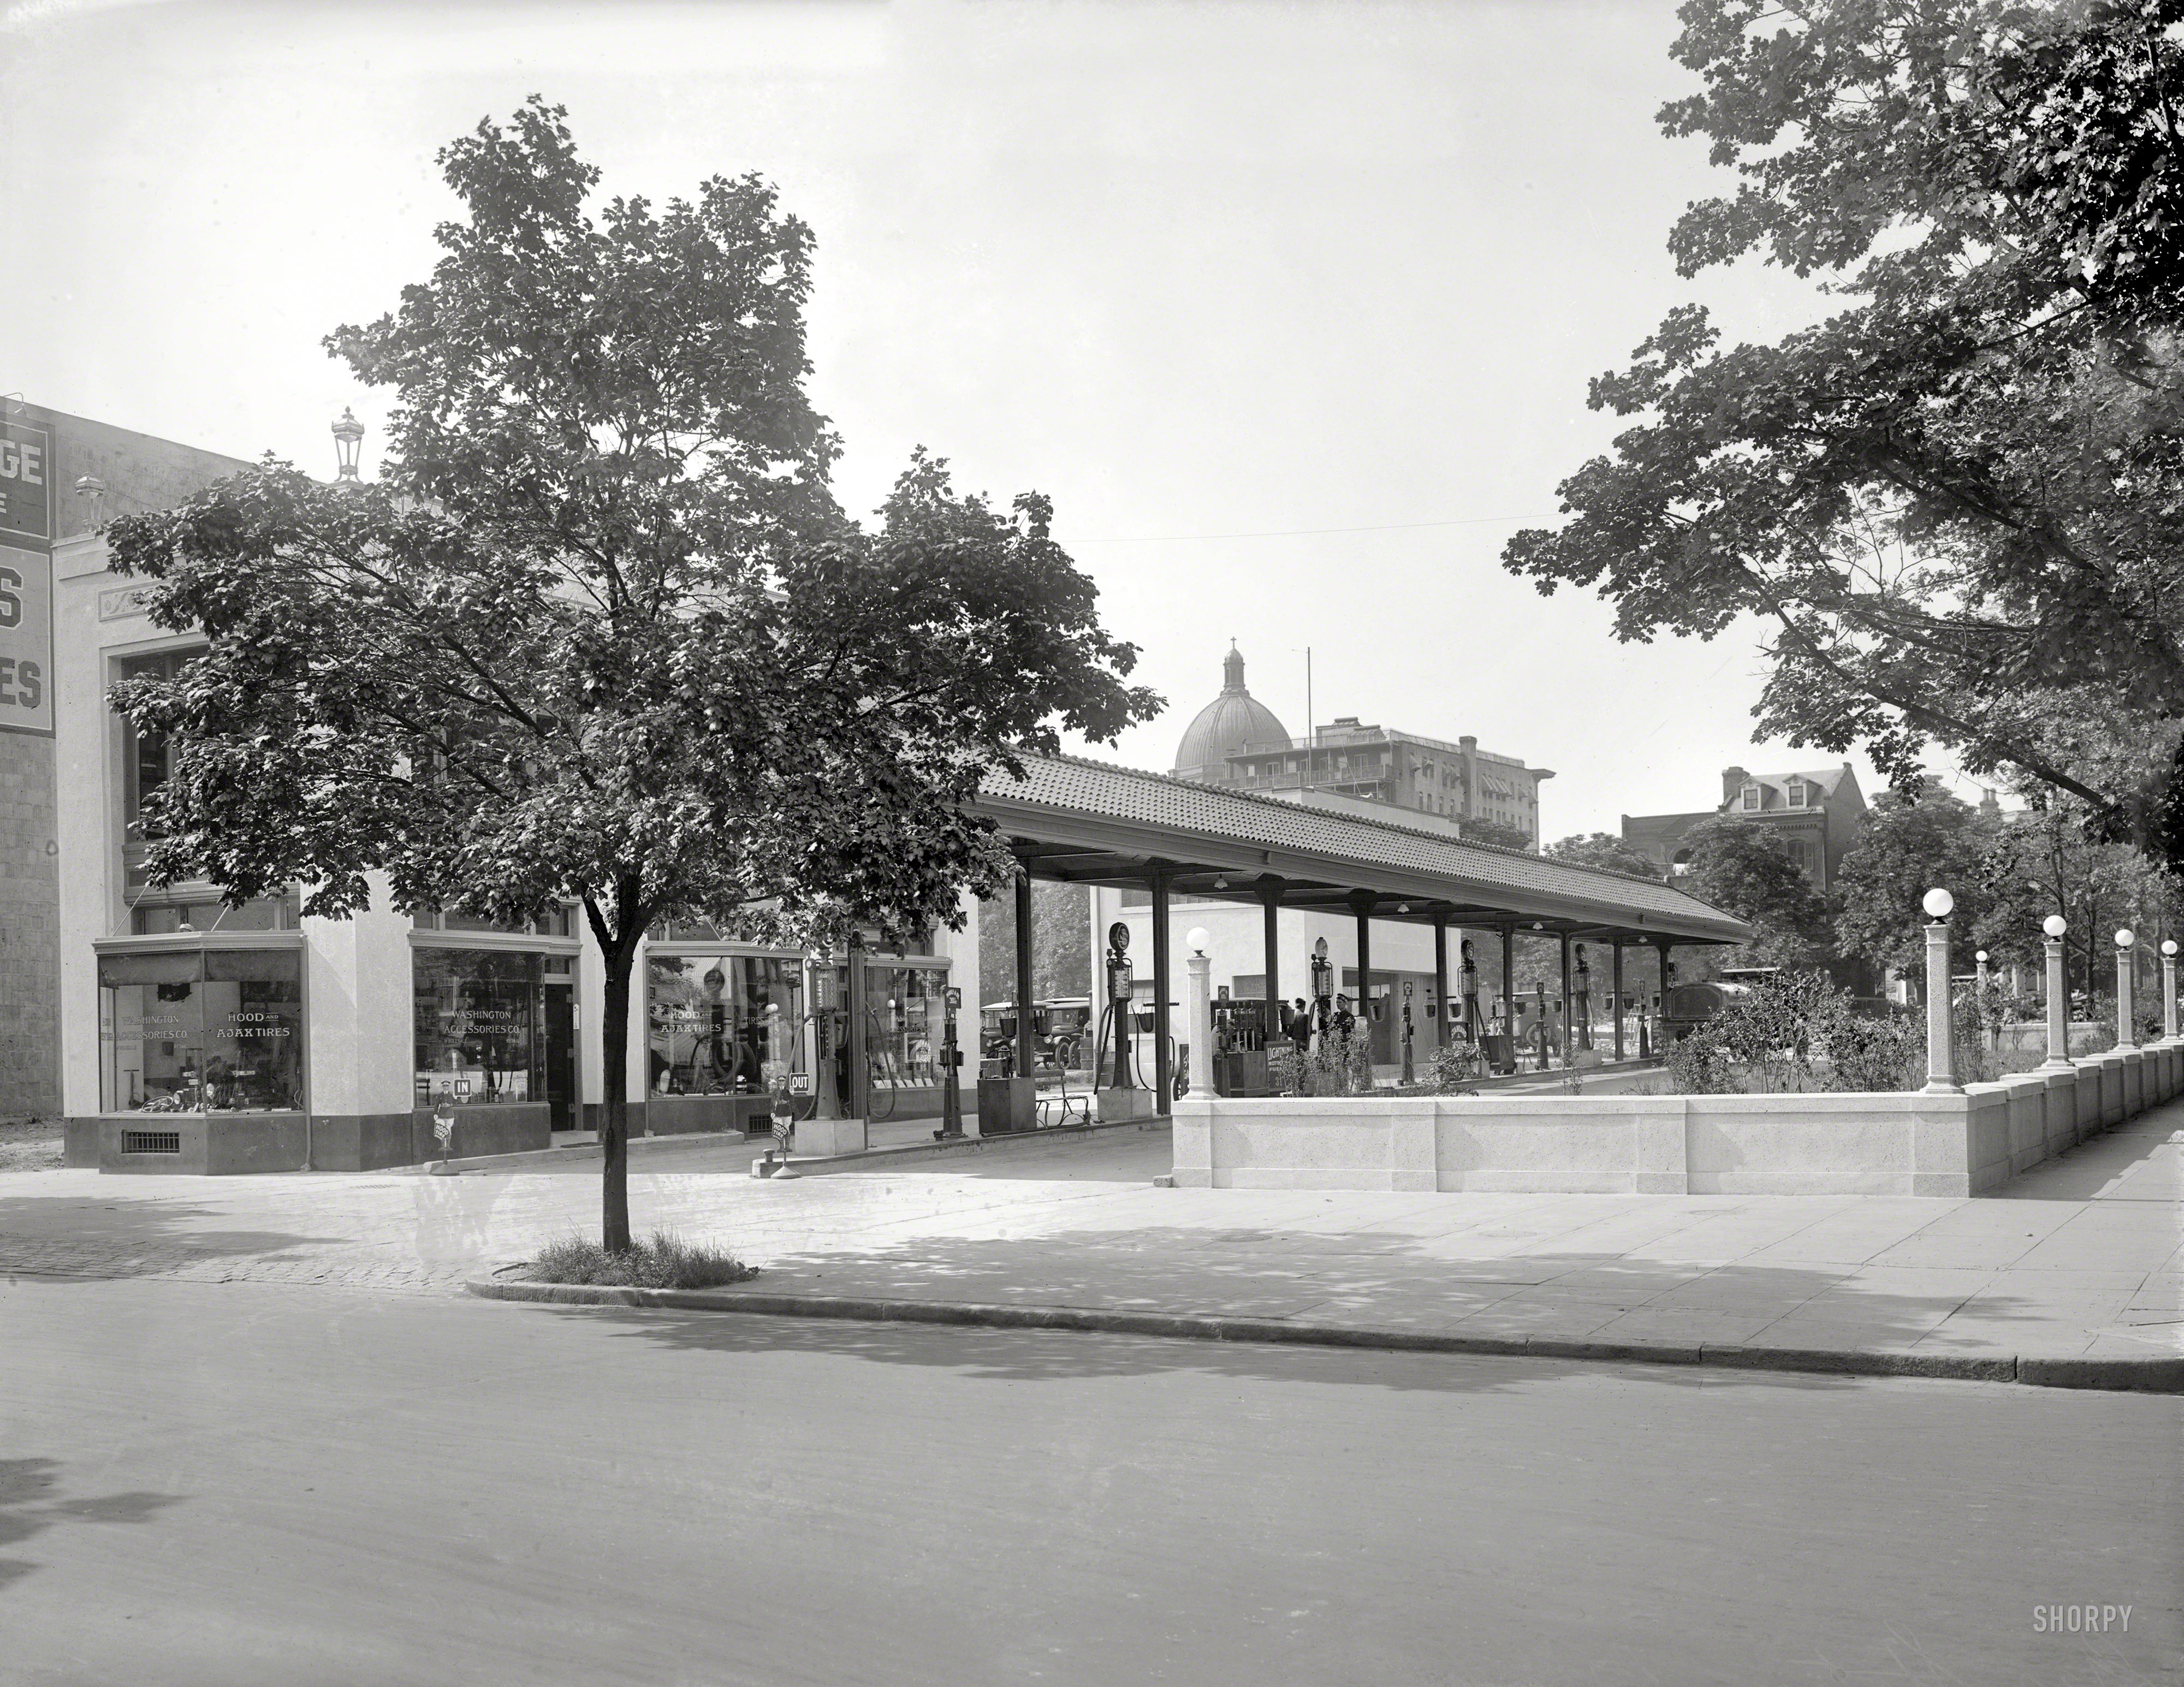 Washington, D.C., circa 1922. "Gas station, 17th and L streets N.W." The recently opened Washington Accessories filling station, also seen here under construction, three years later as Minute Service No. 1 and finally around 1928. National Photo Company Collection glass negative. View full size.